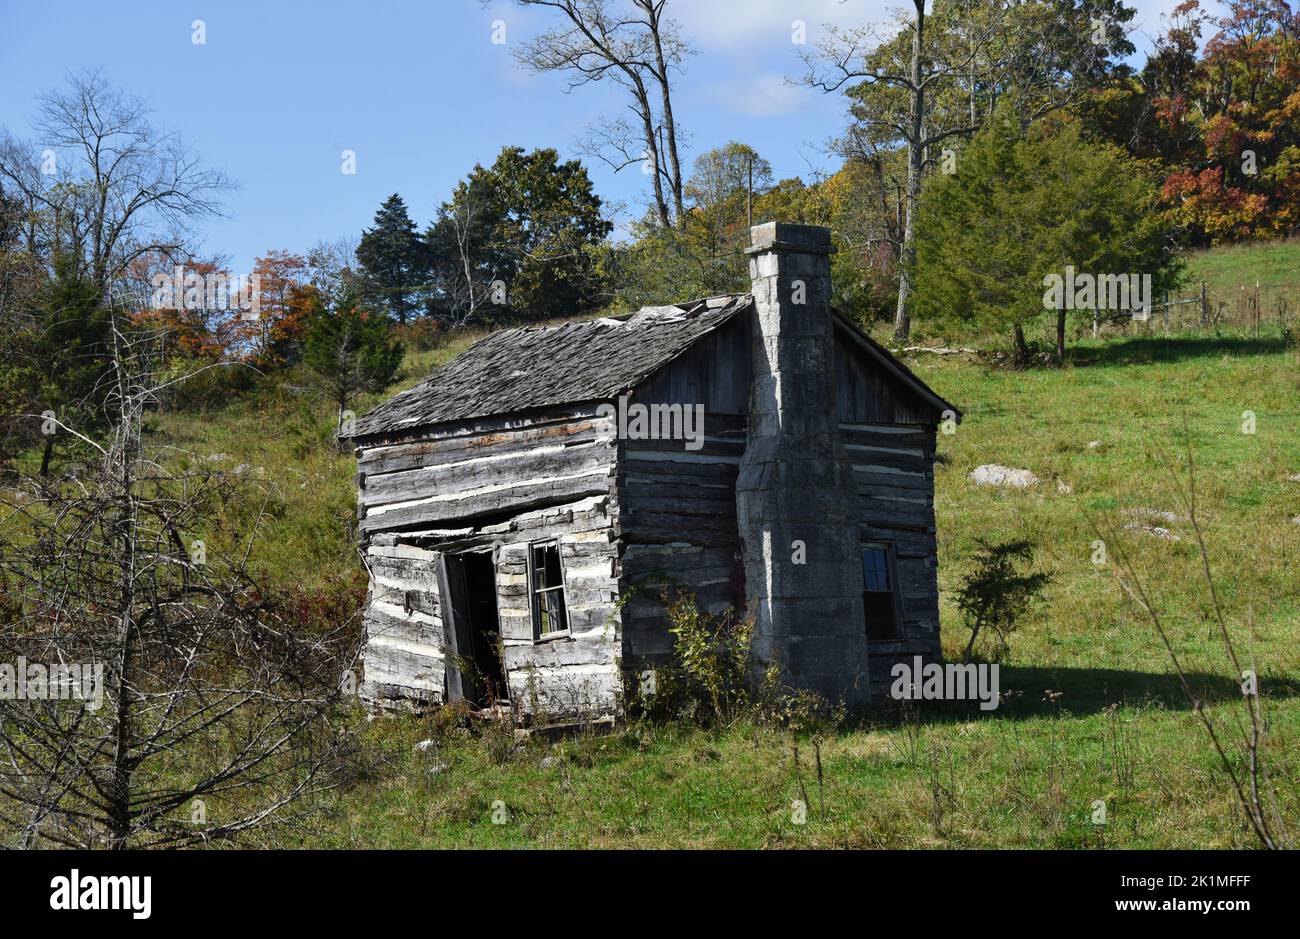 Old log cabin with wood shingle roof, lays abandoned on a hillside in the Appalachian Mountains.  Door hangs open. Stock Photo